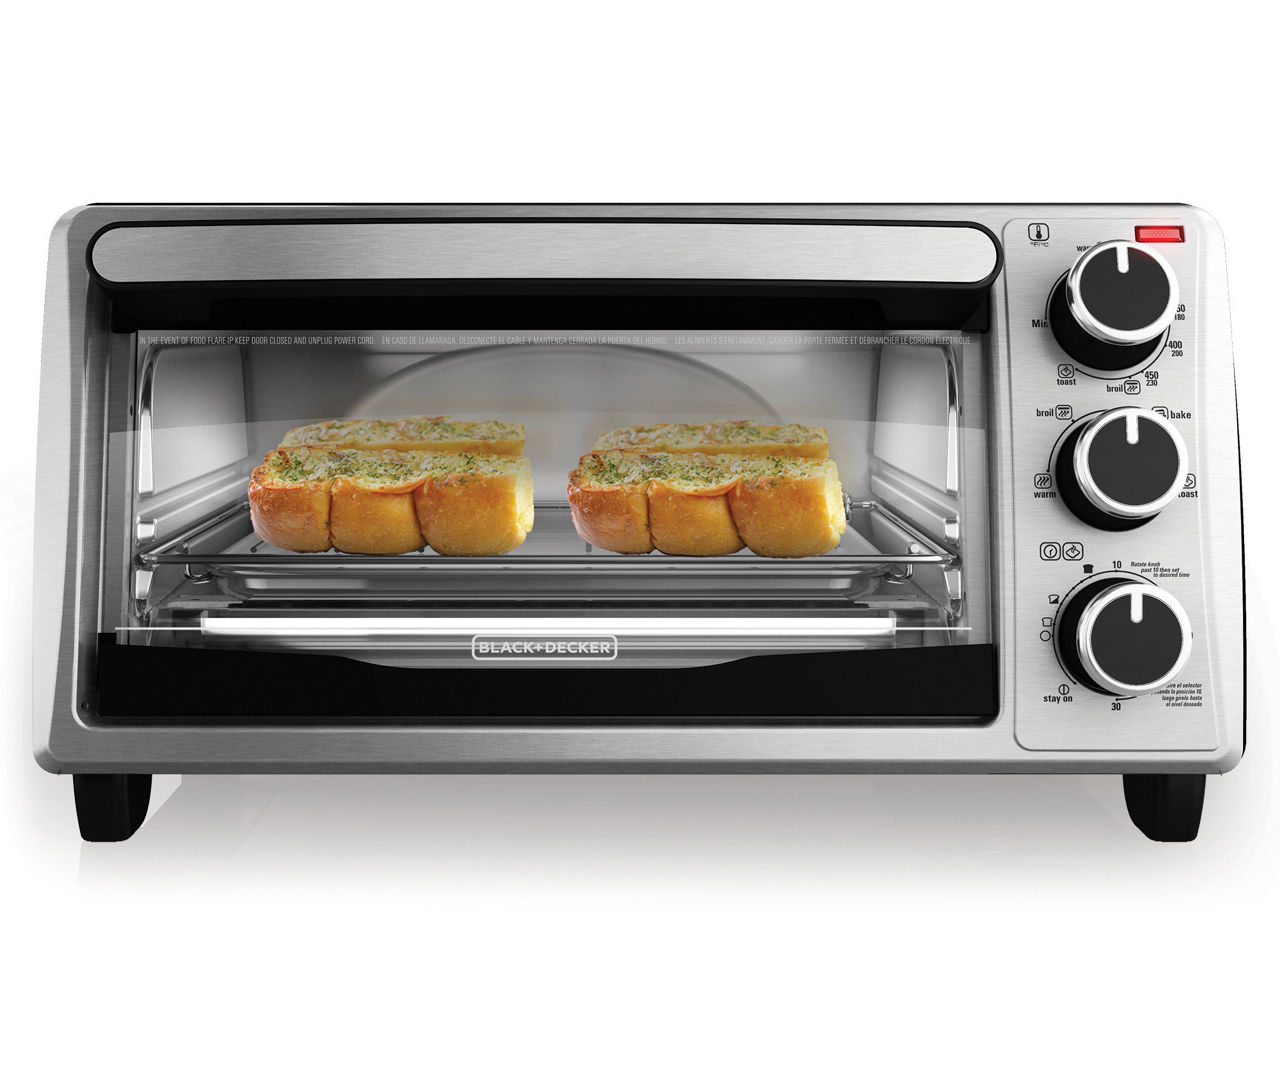  Black+Decker Natural Convection 4-Slice Toaster Oven with Even  Toast Technology & 4 Cooking Functions Including Bake, Broil, Toast & Keep  Warm, with Removable Crumb Tray, Timer and Power Light: Home 